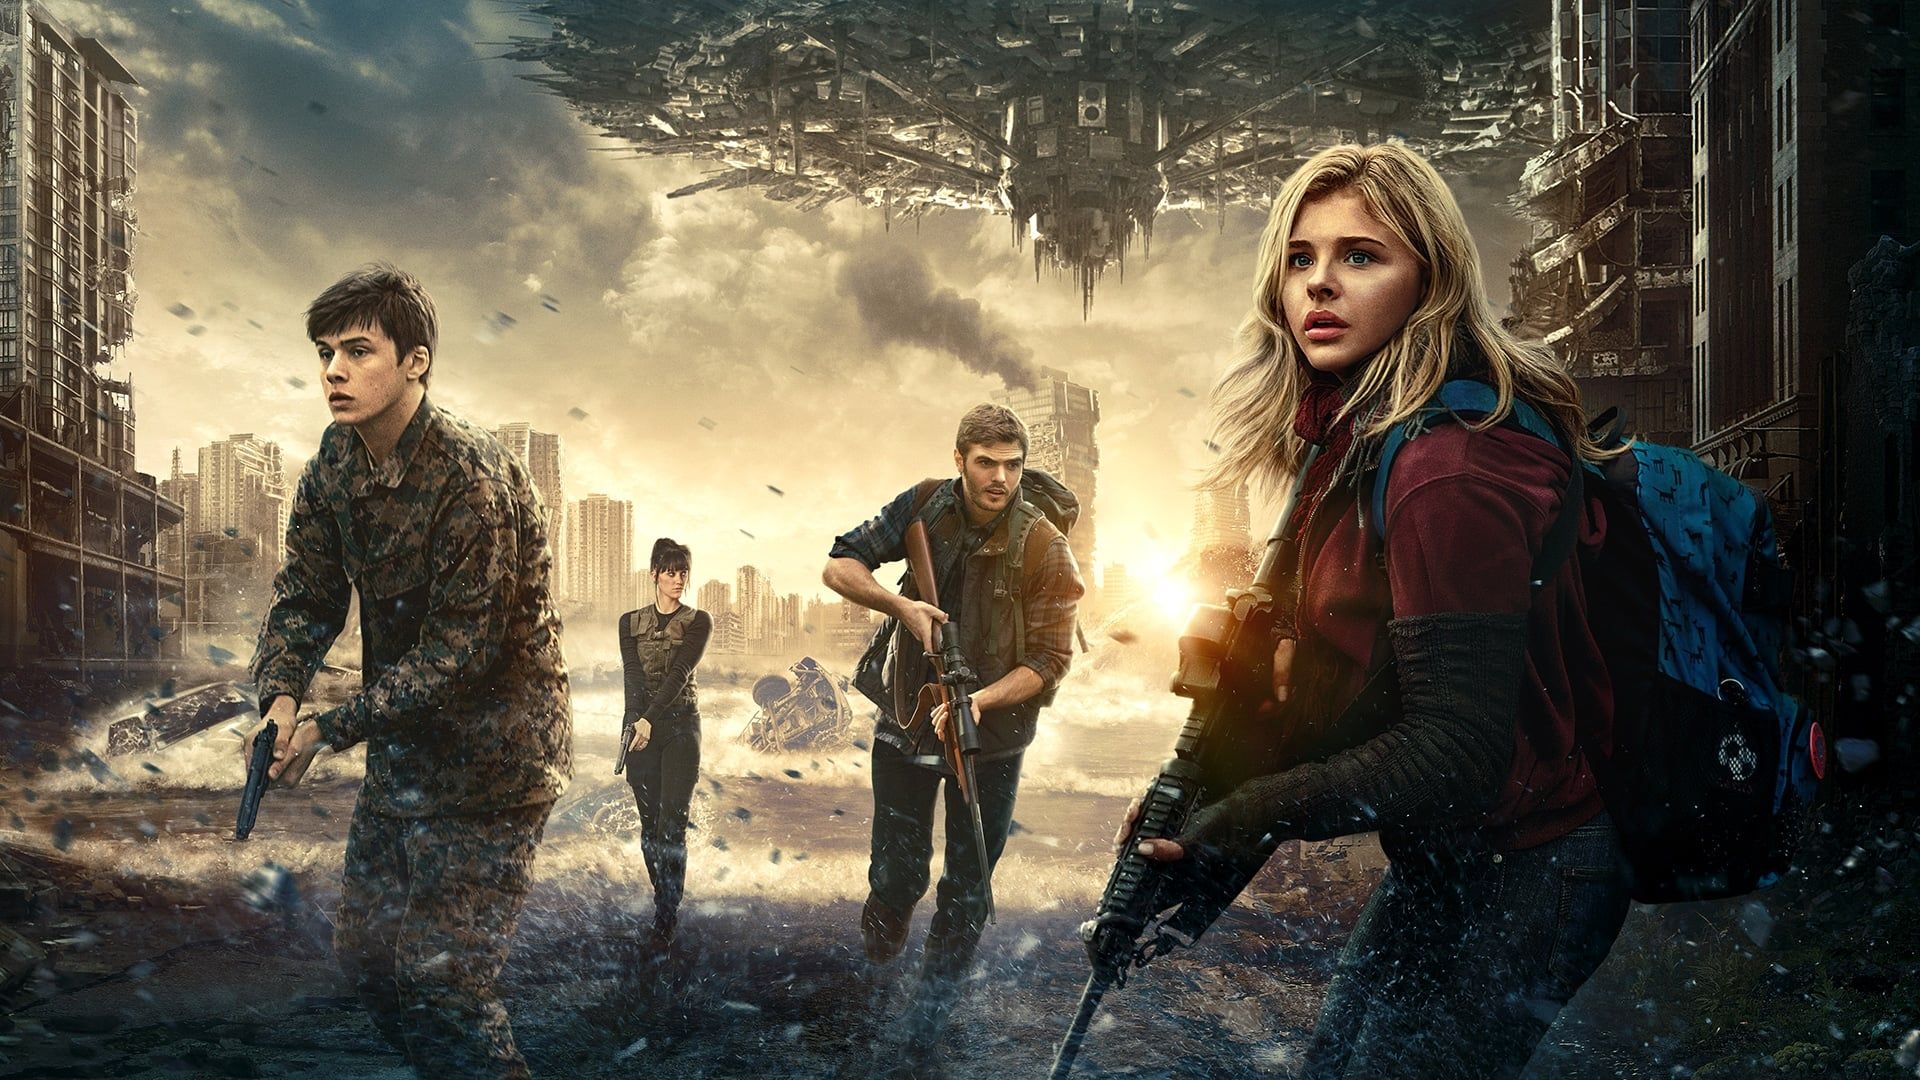 The 5th Wave Backdrop